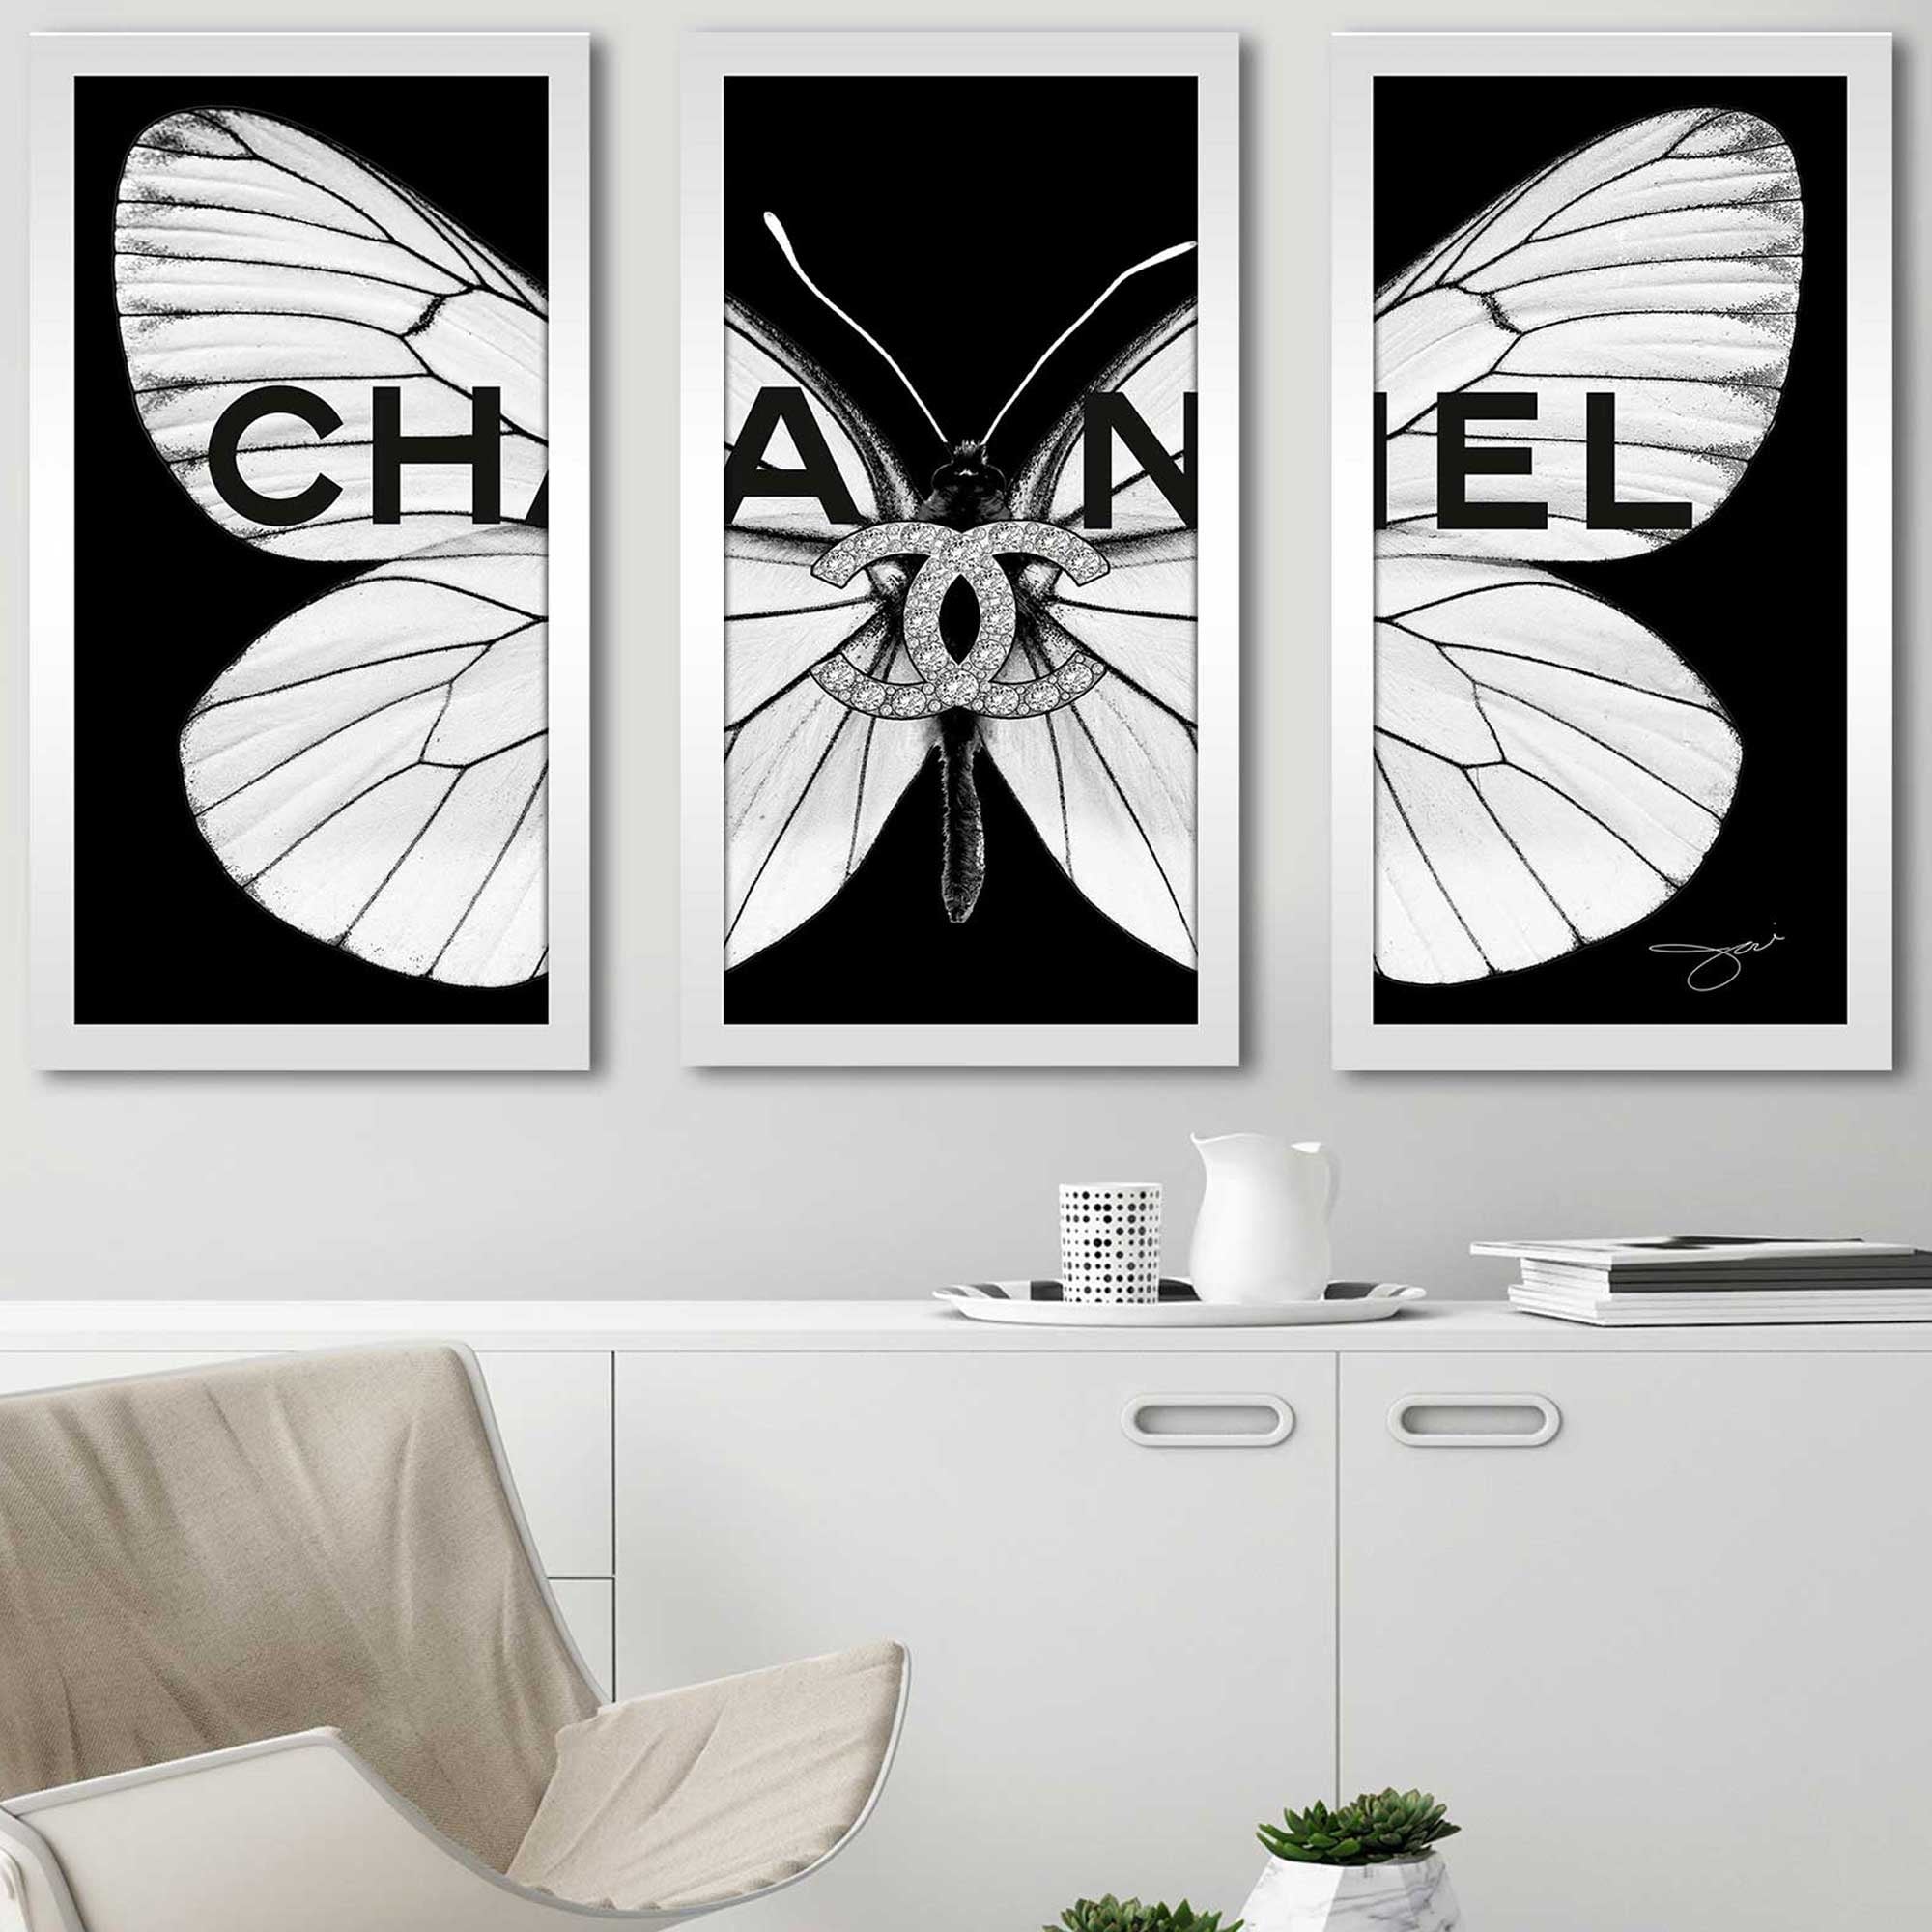 Chanel White Butterfly 3 Piece Print on Acrylic - Bed Bath & Beyond -  36043050